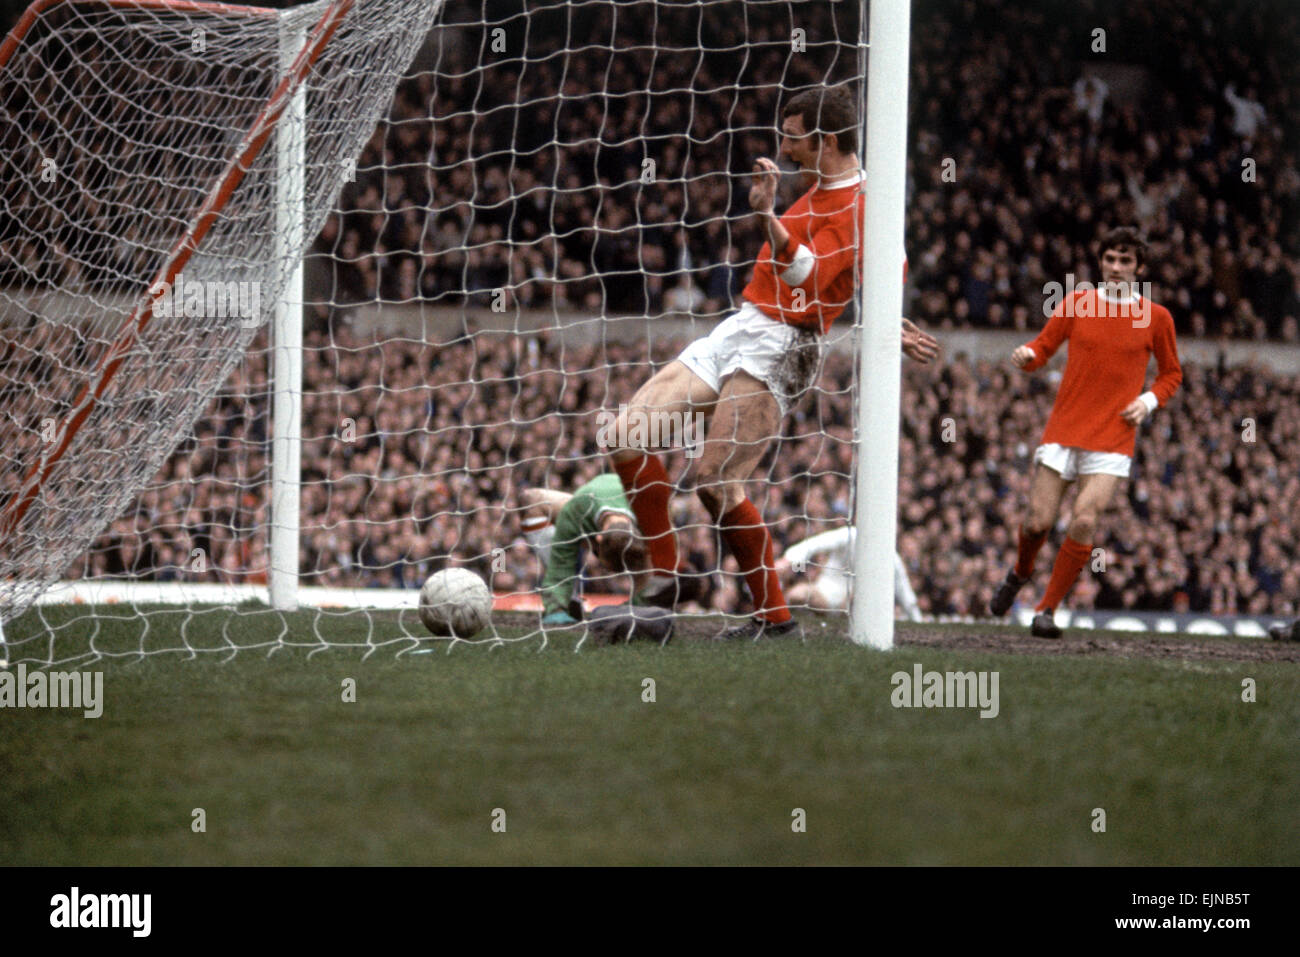 Manchester United v Nottingham Forest league match at Old Trafford 23rd March 1968. Nottingham Forest goalkeeper Brian Williamson is unable to prevent Shay Brennan scoring United's 2nd goal as team mate George Best looks on. Final score: Manchester United 3-0 Nottingham Forest Stock Photo